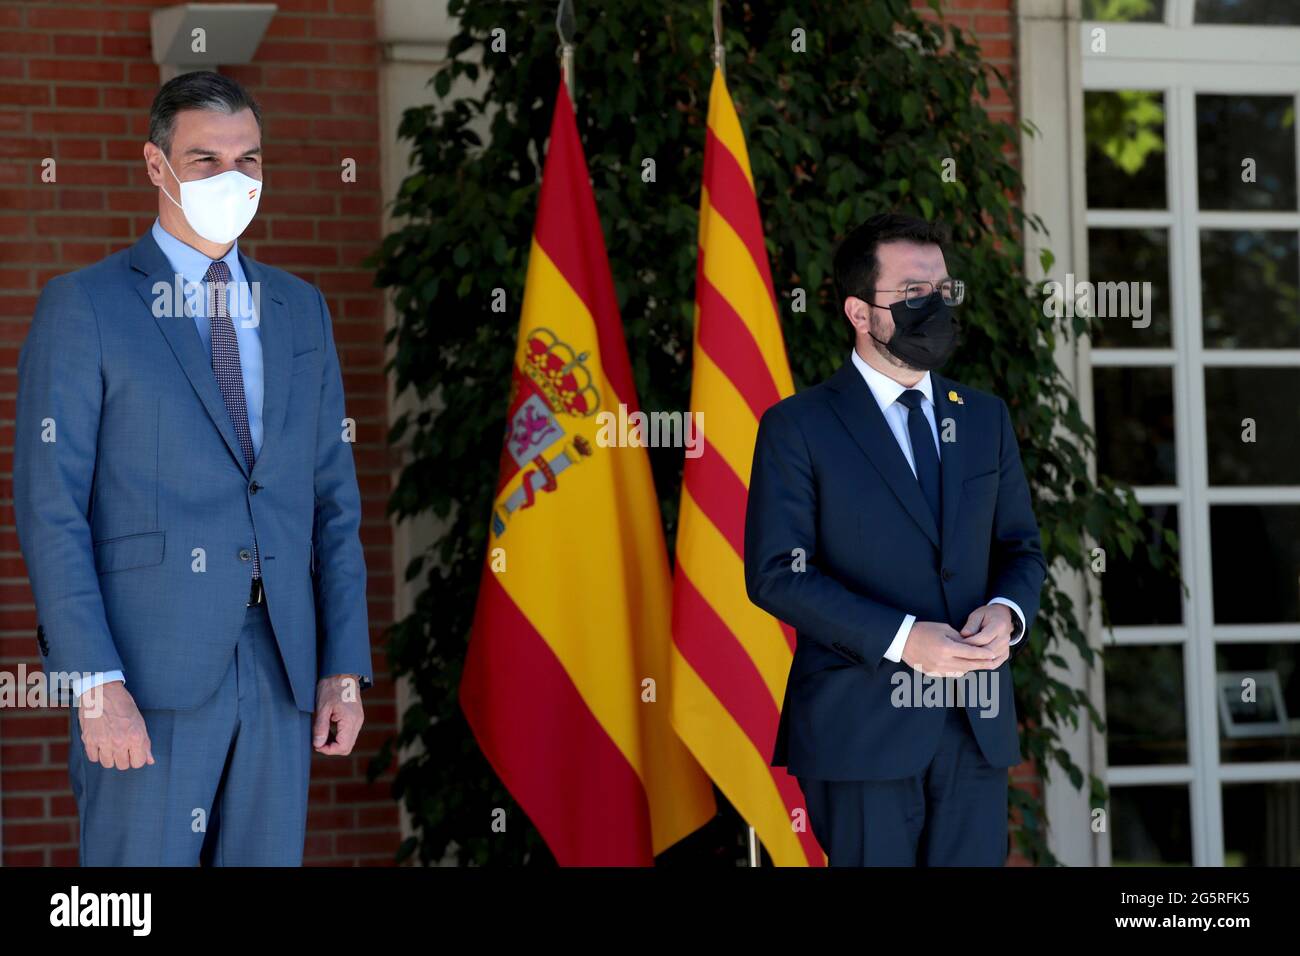 Madrid, Spain; 29.06.2021.- President of the Spanish Government, Pedro Sanchez meets with president of the Generalitat, of Catalonia, Pere Aragonès in the complex of La Moncloa, the first meeting after the pardon granted a week ago to the imprisoned Catalan politicians. Photo: Juan Carlos Rojas Stock Photo